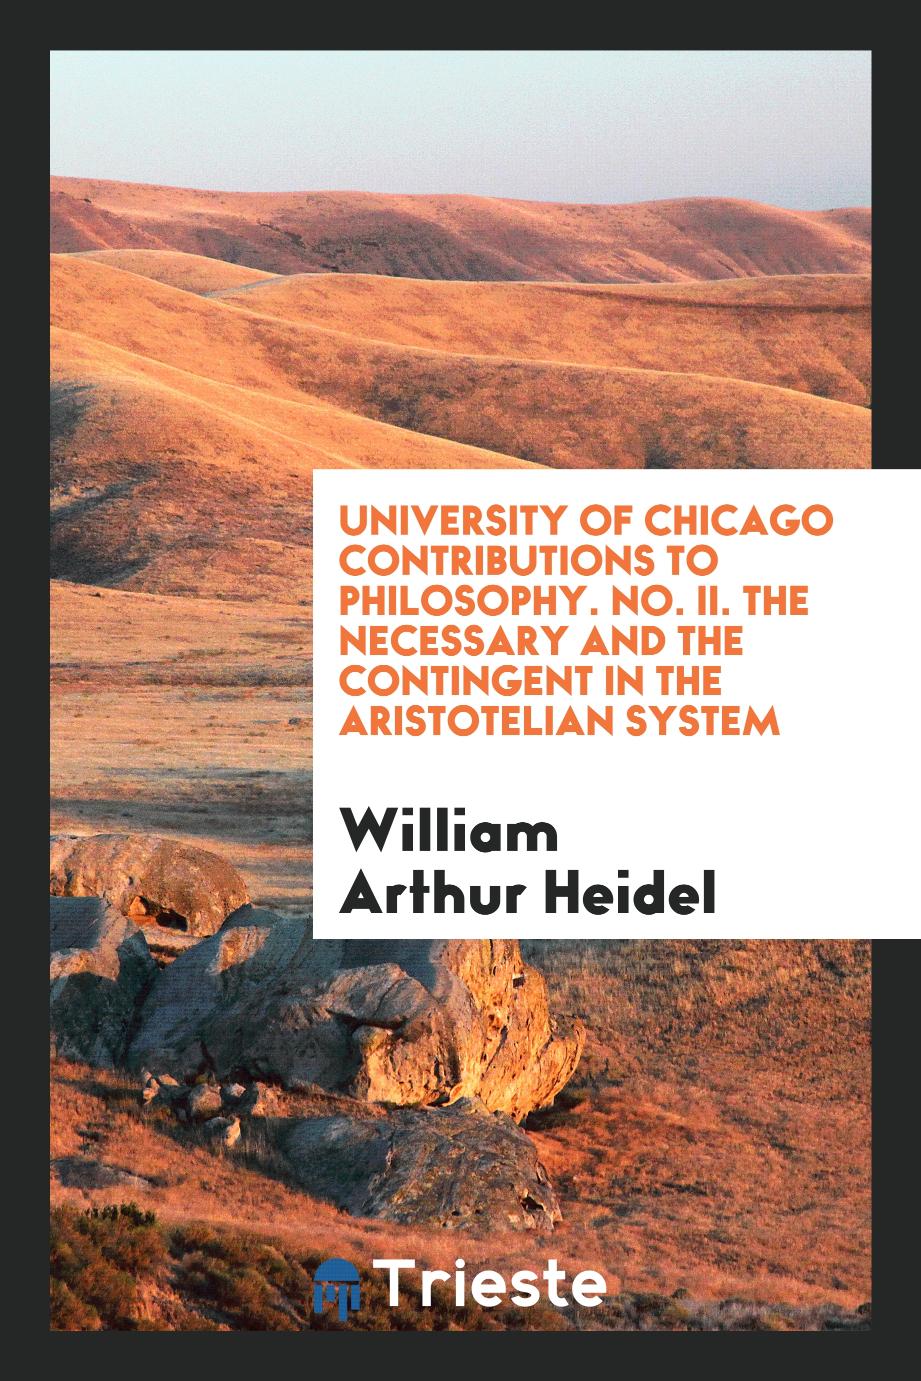 University of Chicago Contributions to Philosophy. No. II. The necessary and the contingent in the Aristotelian system